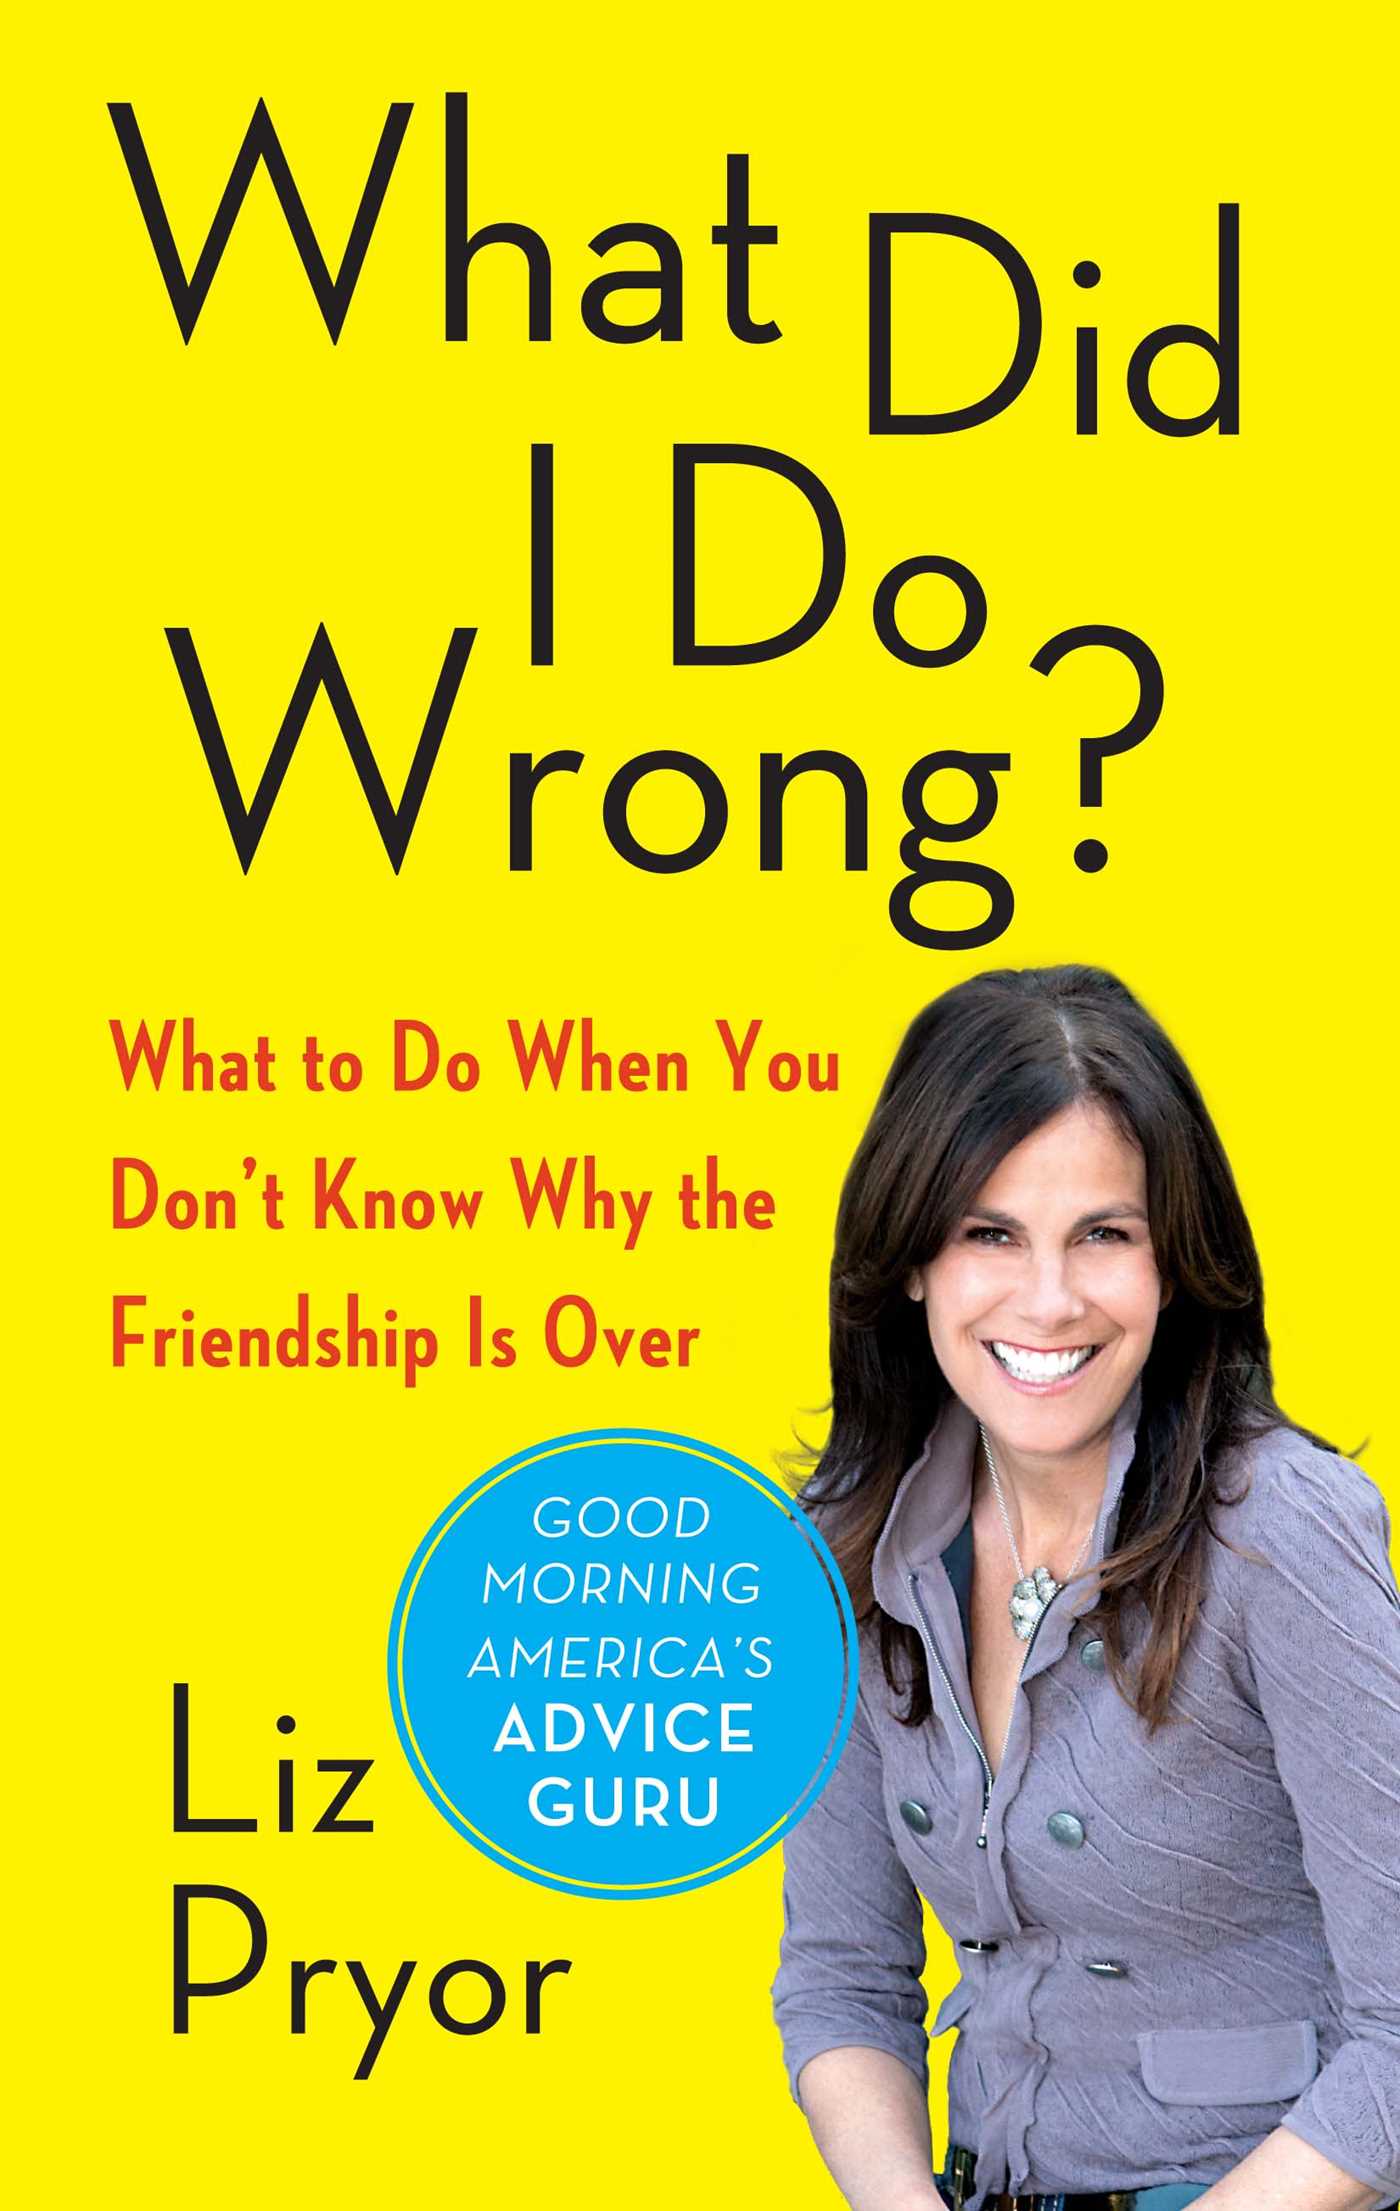 What Did I Do Wrong? : What to Do When You Don't Know Why the Friendship Is Over (Paperback) - image 1 of 1